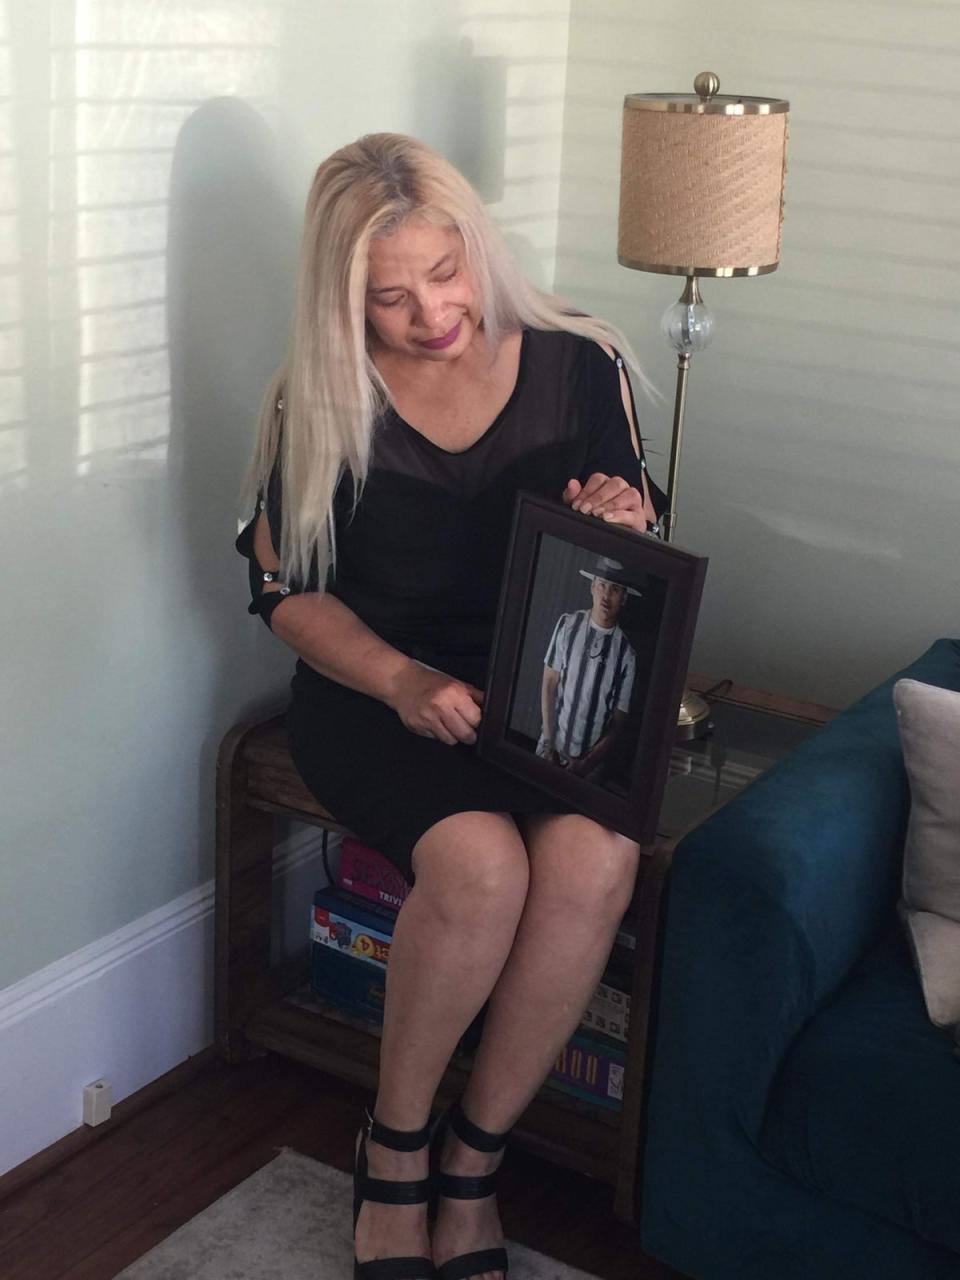 Maria De Los Angeles Pena holds a photo of her son Rudy, who was crushed in the Astroworld tragedy on 5 November 2021 (Courtesy of Pena family)